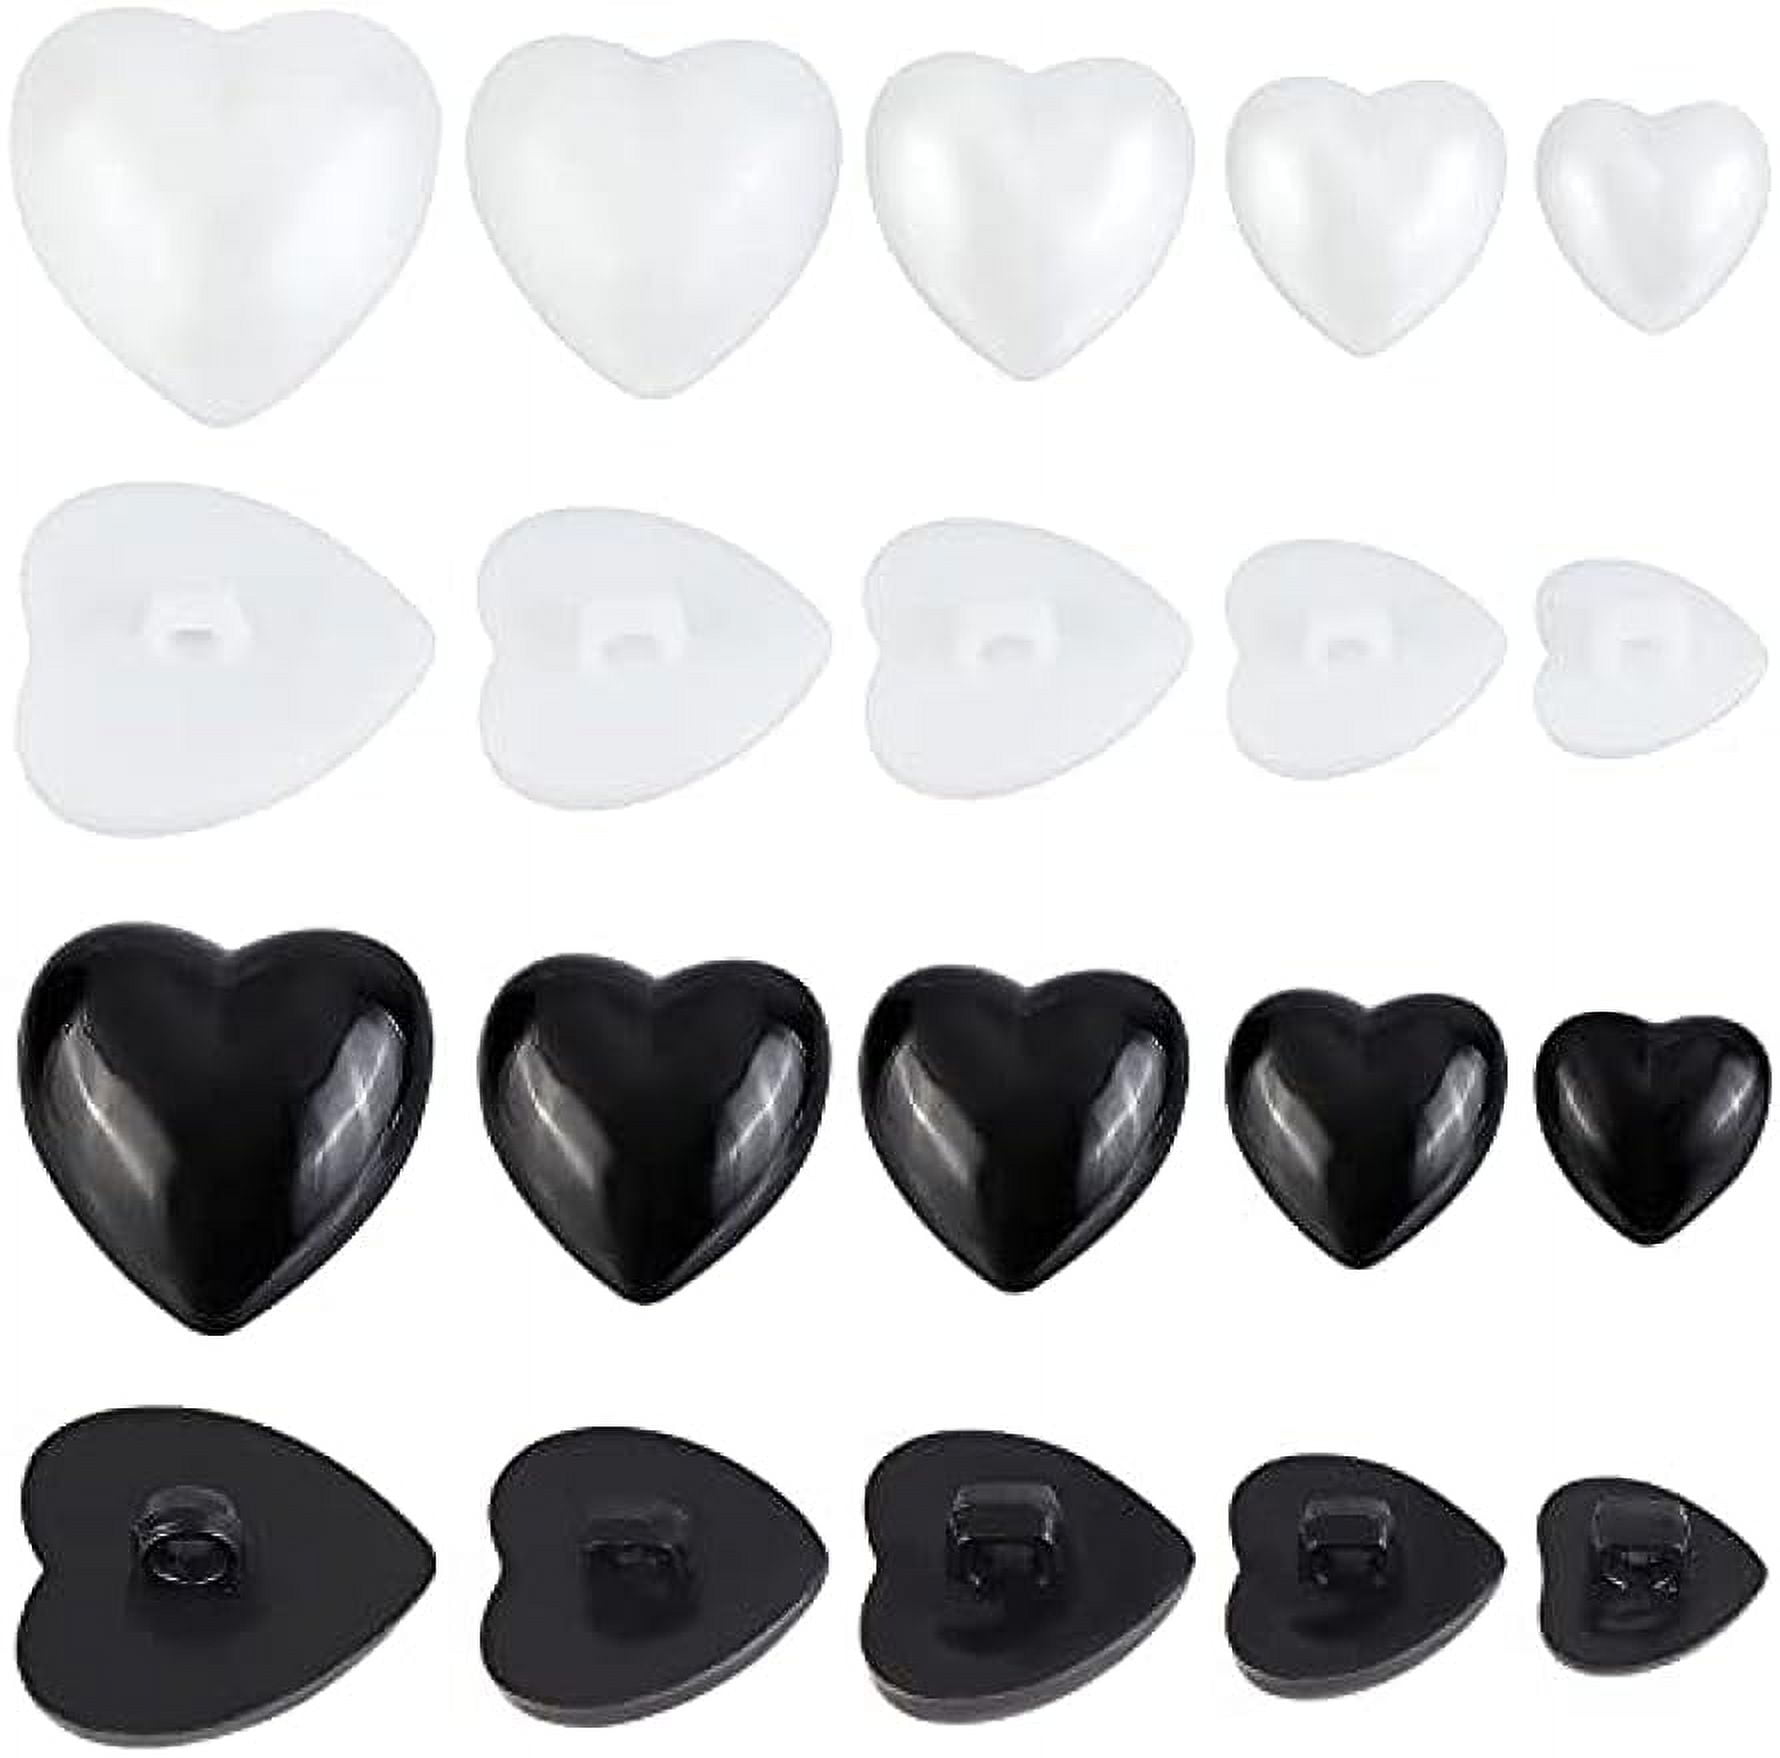 100Pcs 5 Sizes Acrylic Shank Buttons 1-Hole Heart Plastic Button White  Black Love Heart Button Set for Fabrics Crafts DIY Projects 25mm 20mm 18mm  15mm 12mm 